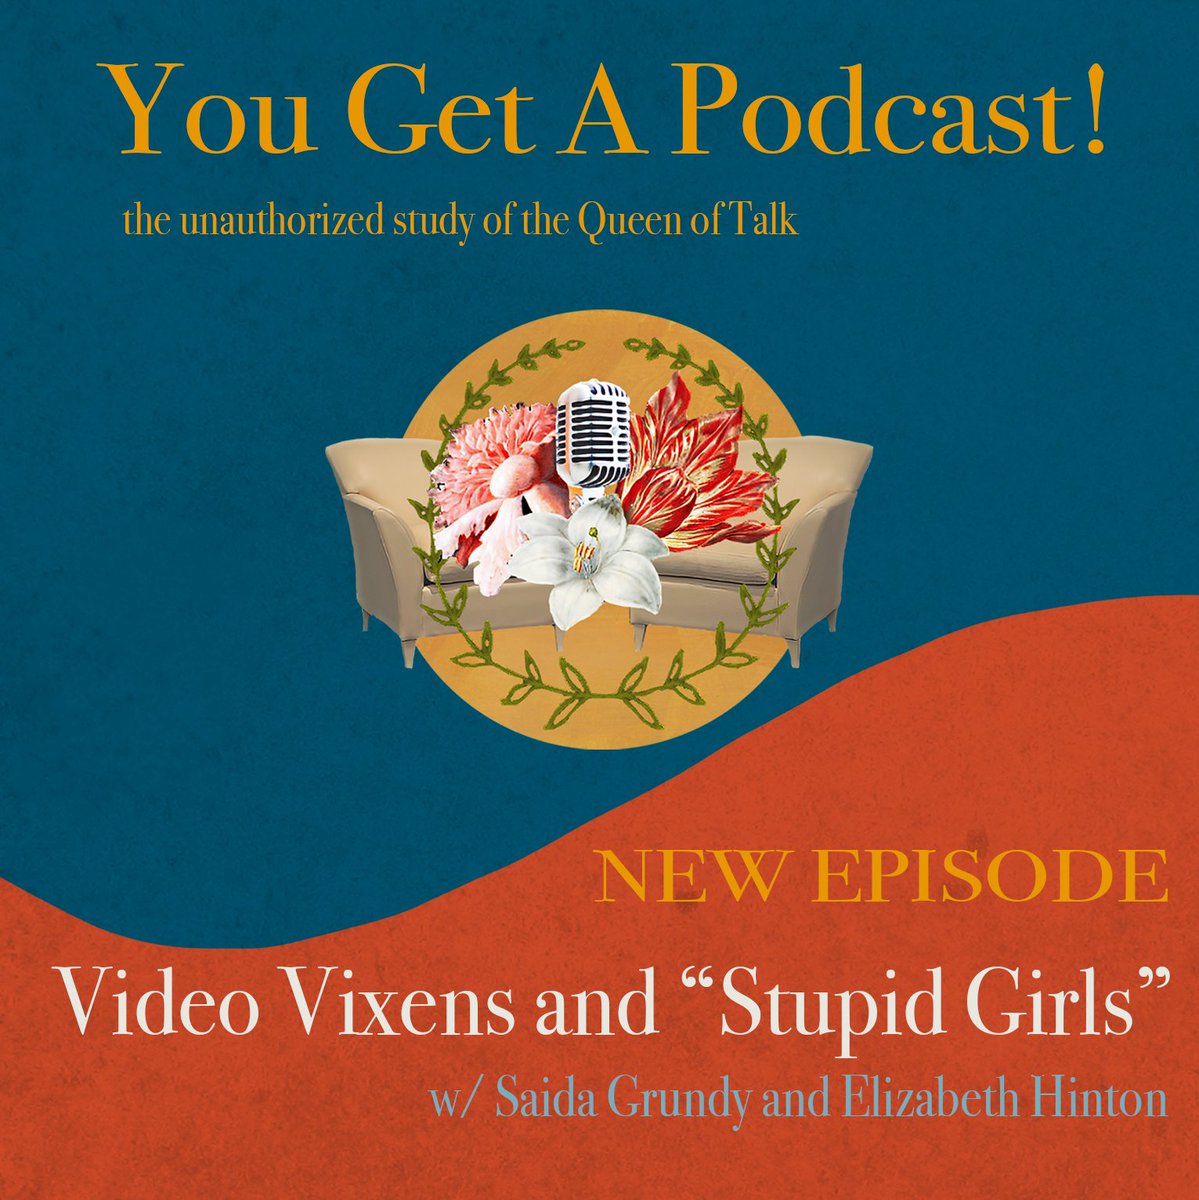 New episode! We go back to the 'naughties' era to talk about how the media portrayed young women, and why Oprah weighed in: video vixens, @Pink's 'stupid girls,' @ParisHilton, and more. Available everywhere!